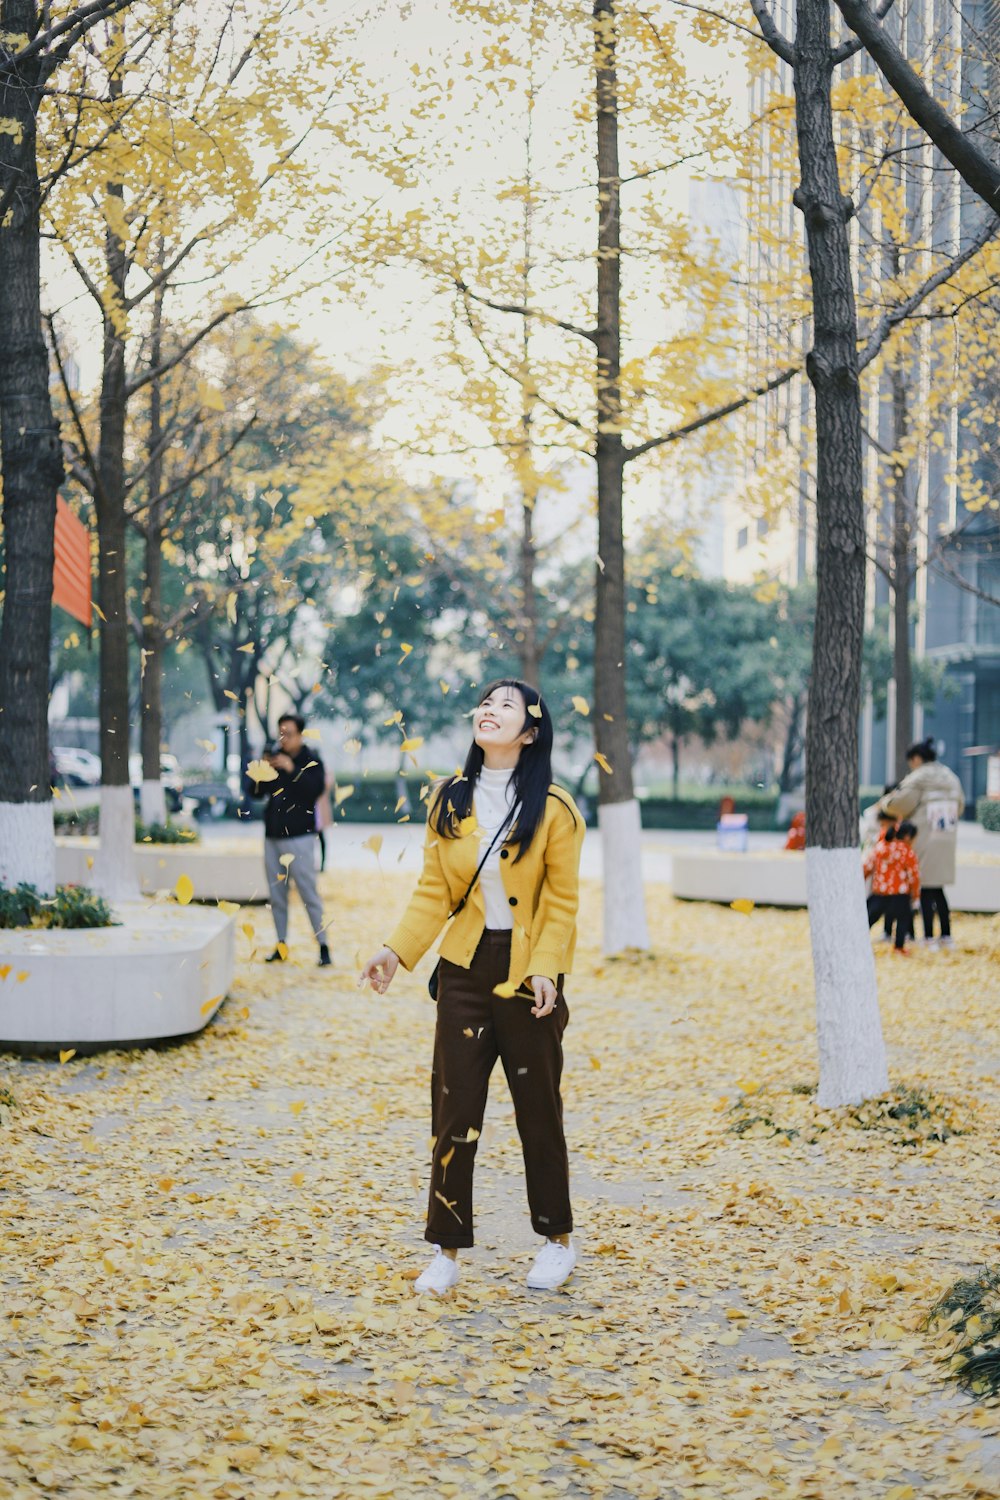 woman near trees with falling leaves